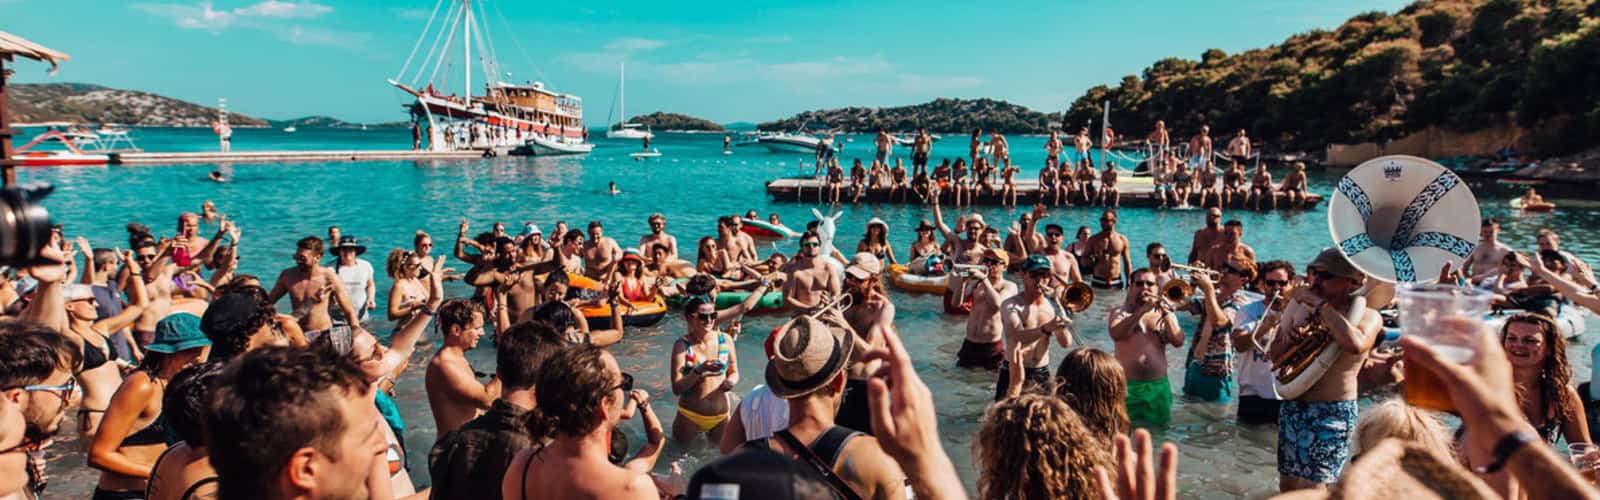 First-Ever Croatia Beach Music Conference 2021 Comes to Zrce Beach